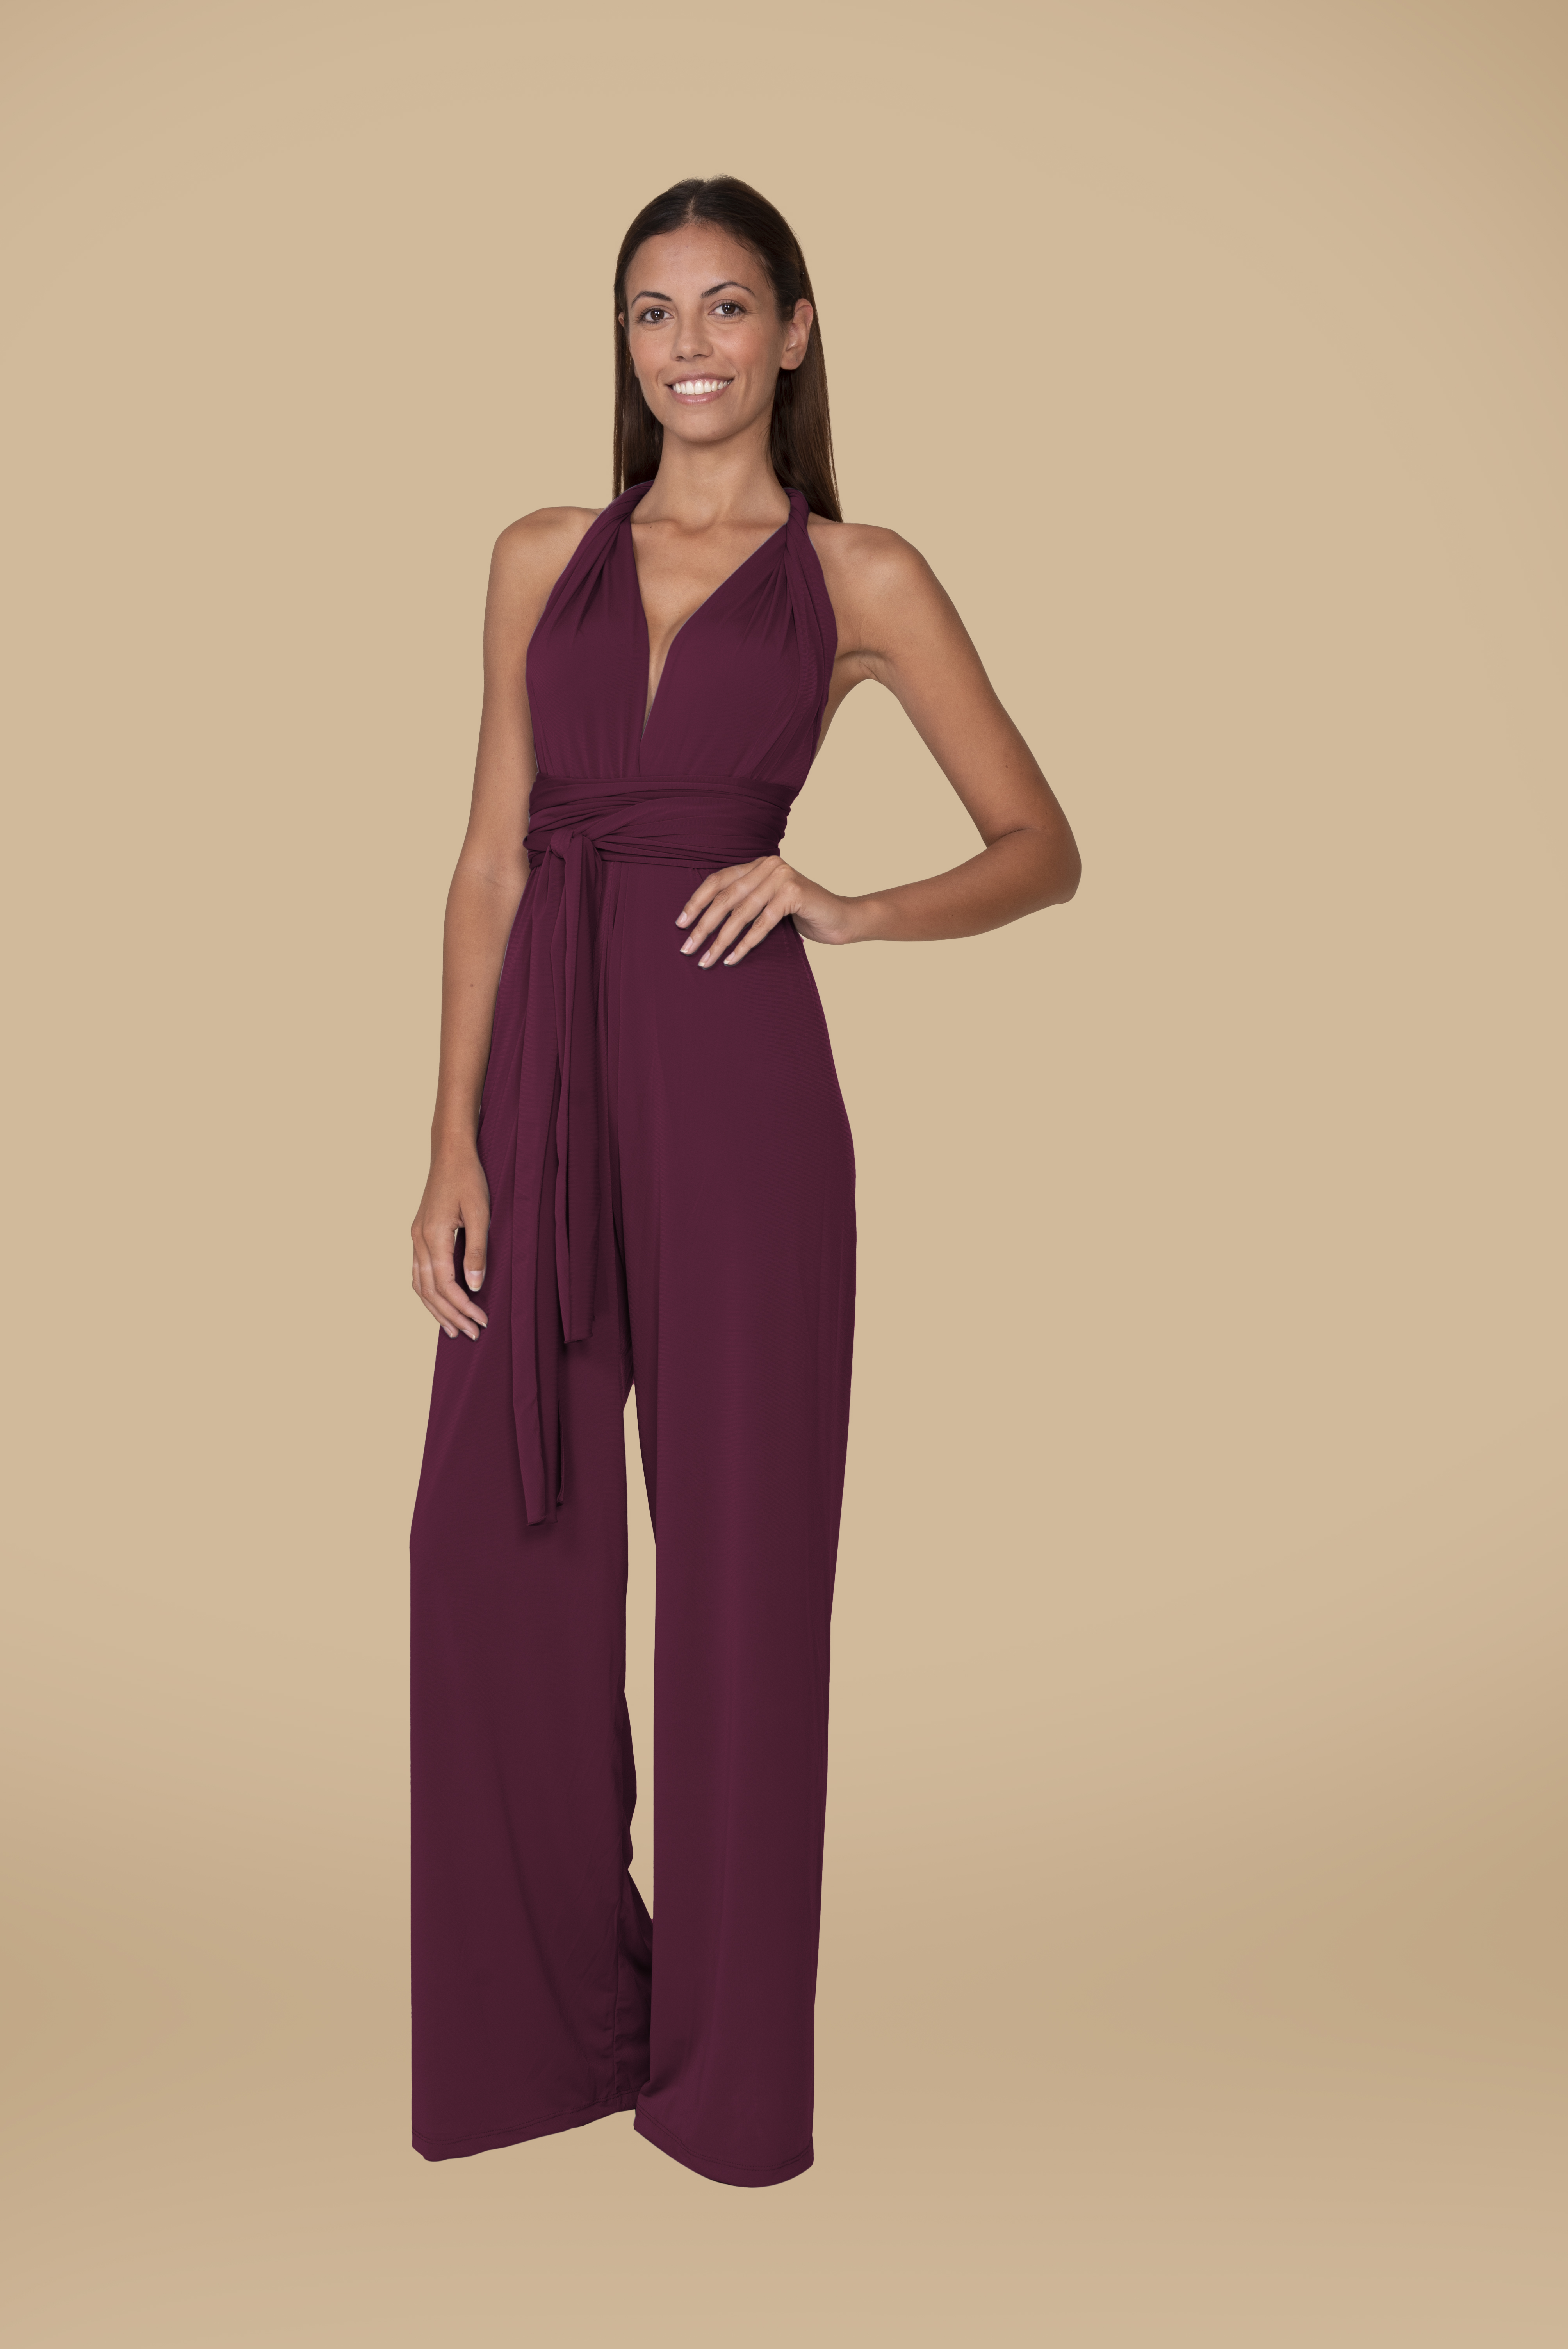 JUMPSUIT IN AUBERGINE by Infinit Barcelona